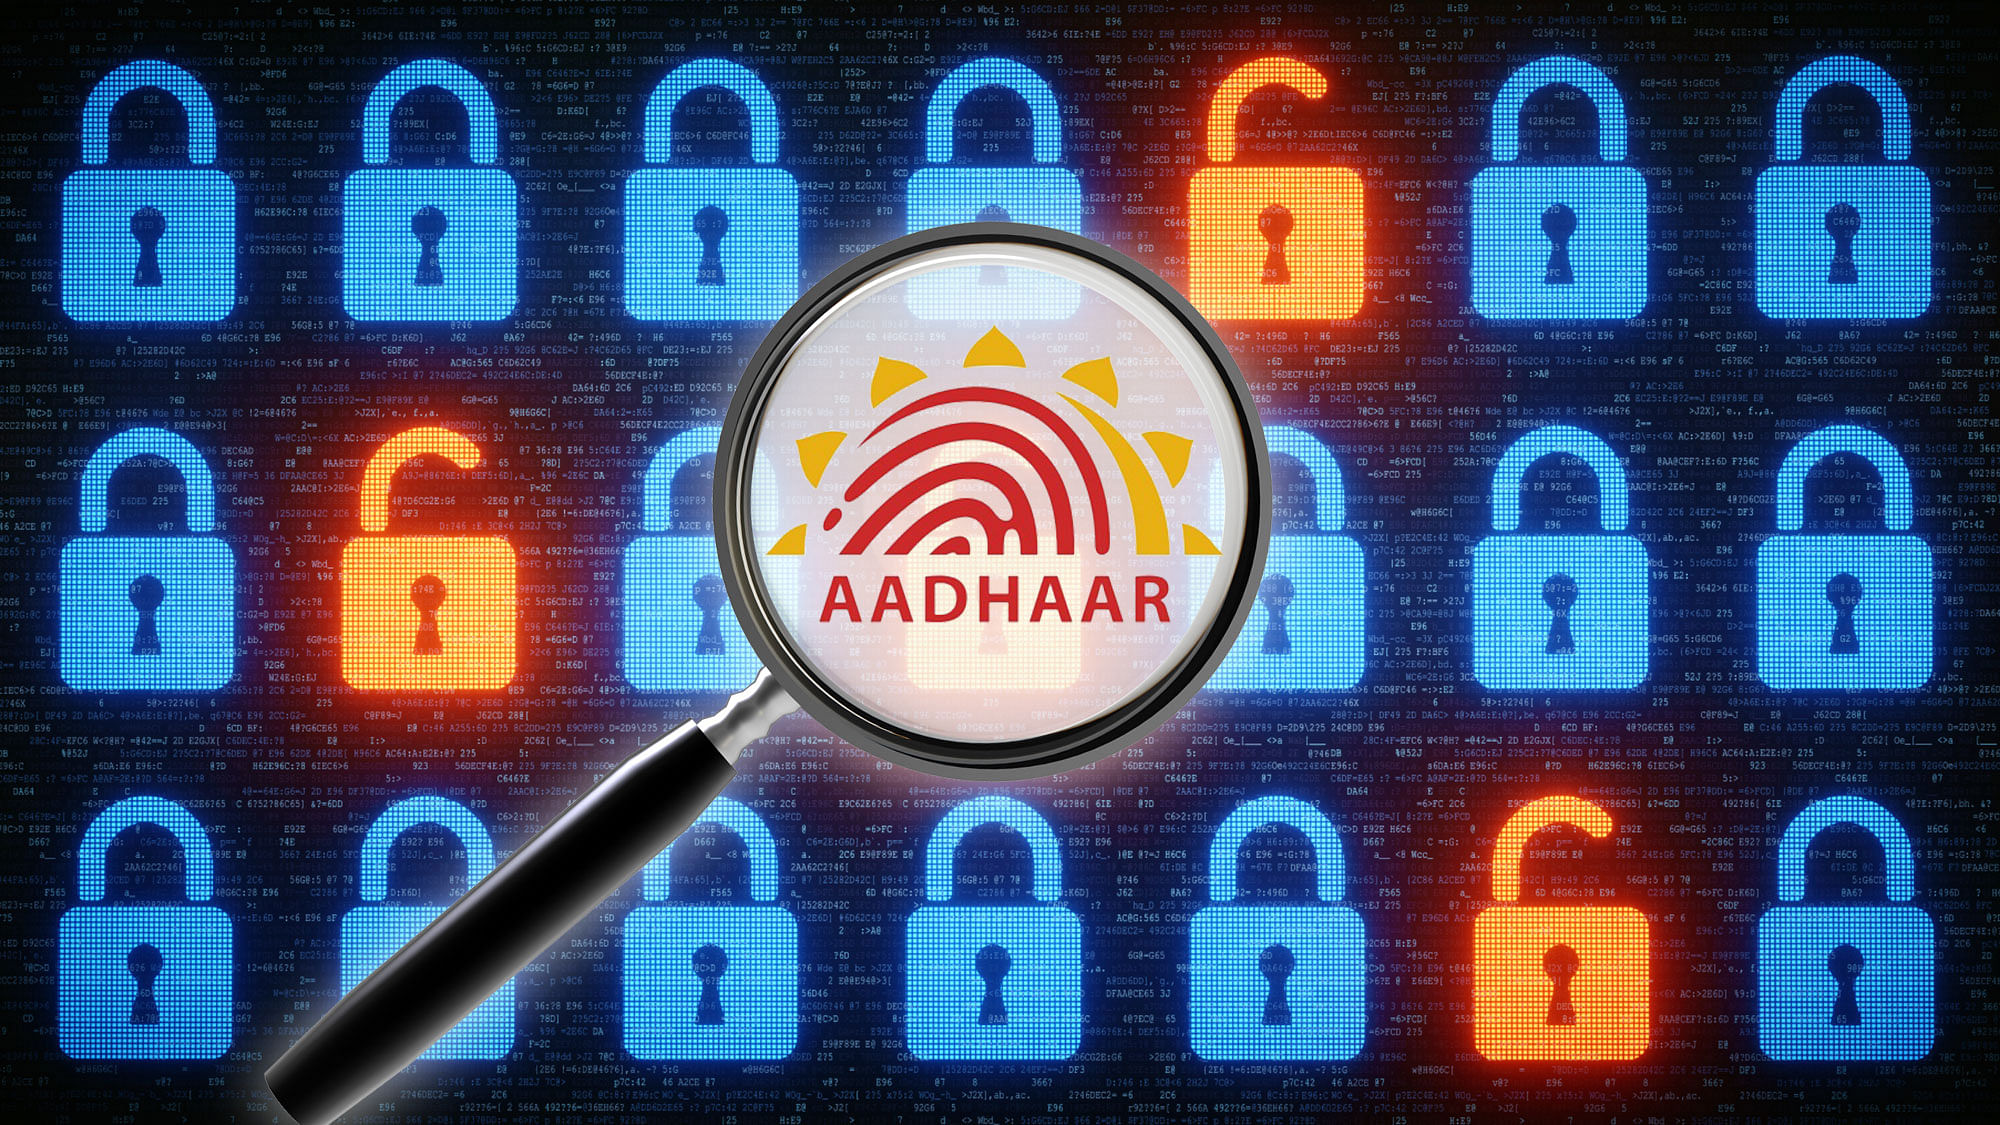 A senior officer said that data servers of the UIDAI were not compromised, but Abhinav Srivastava’s mobile app had managed to illegally gain information by impersonating a government server.&nbsp;